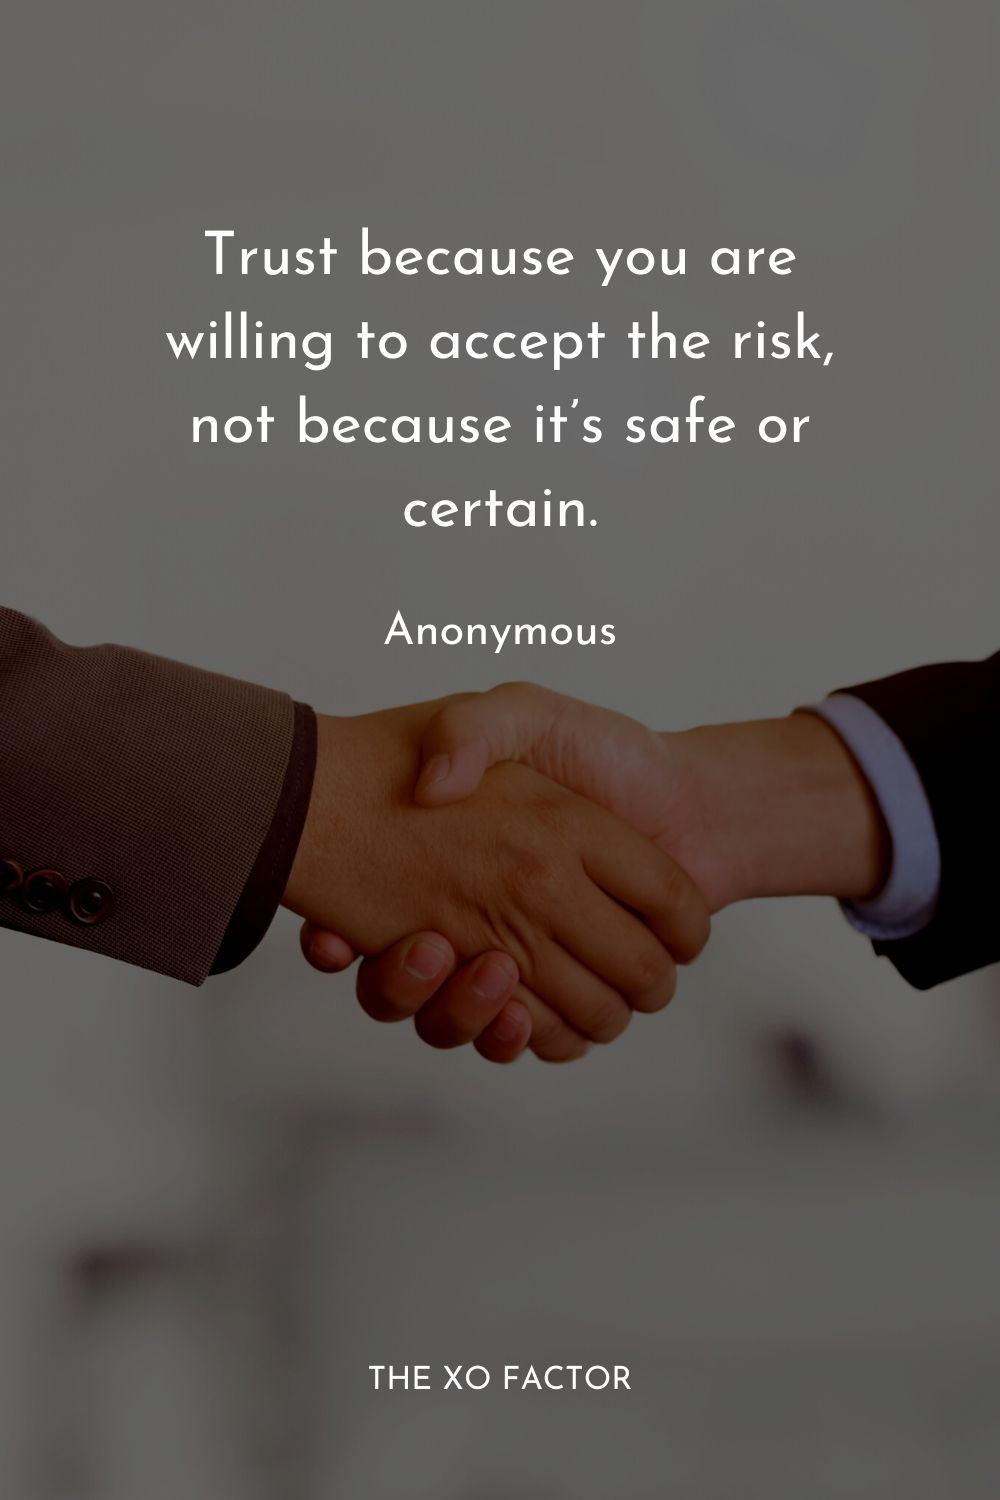 Trust because you are willing to accept the risk, not because it’s safe or certain.